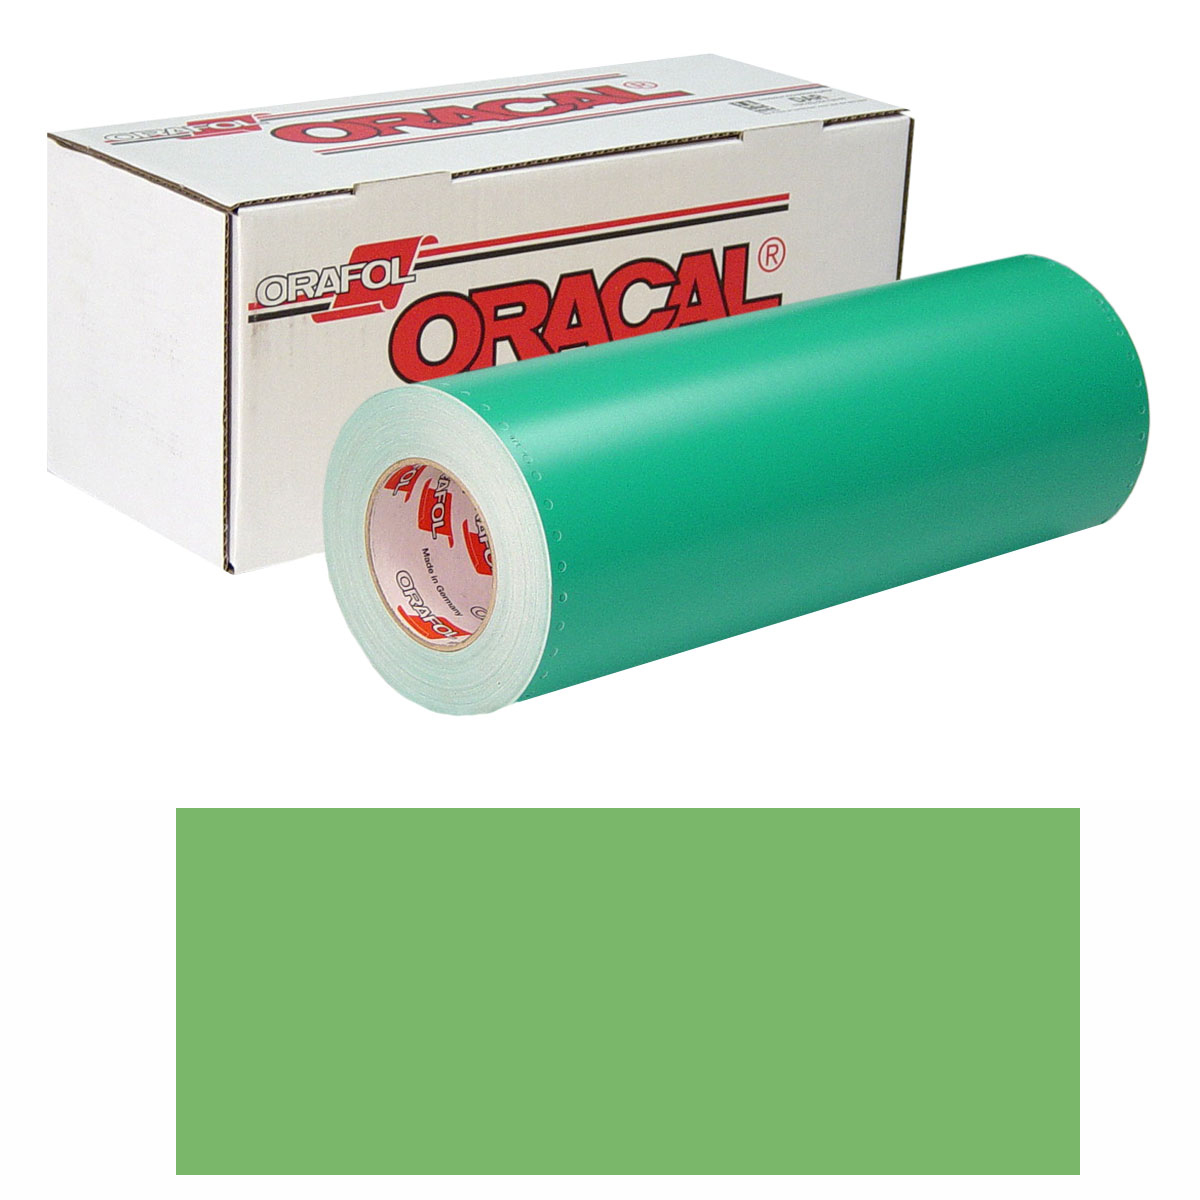 ORACAL 8500 30in X 50yd 063 Lime-Tree Green